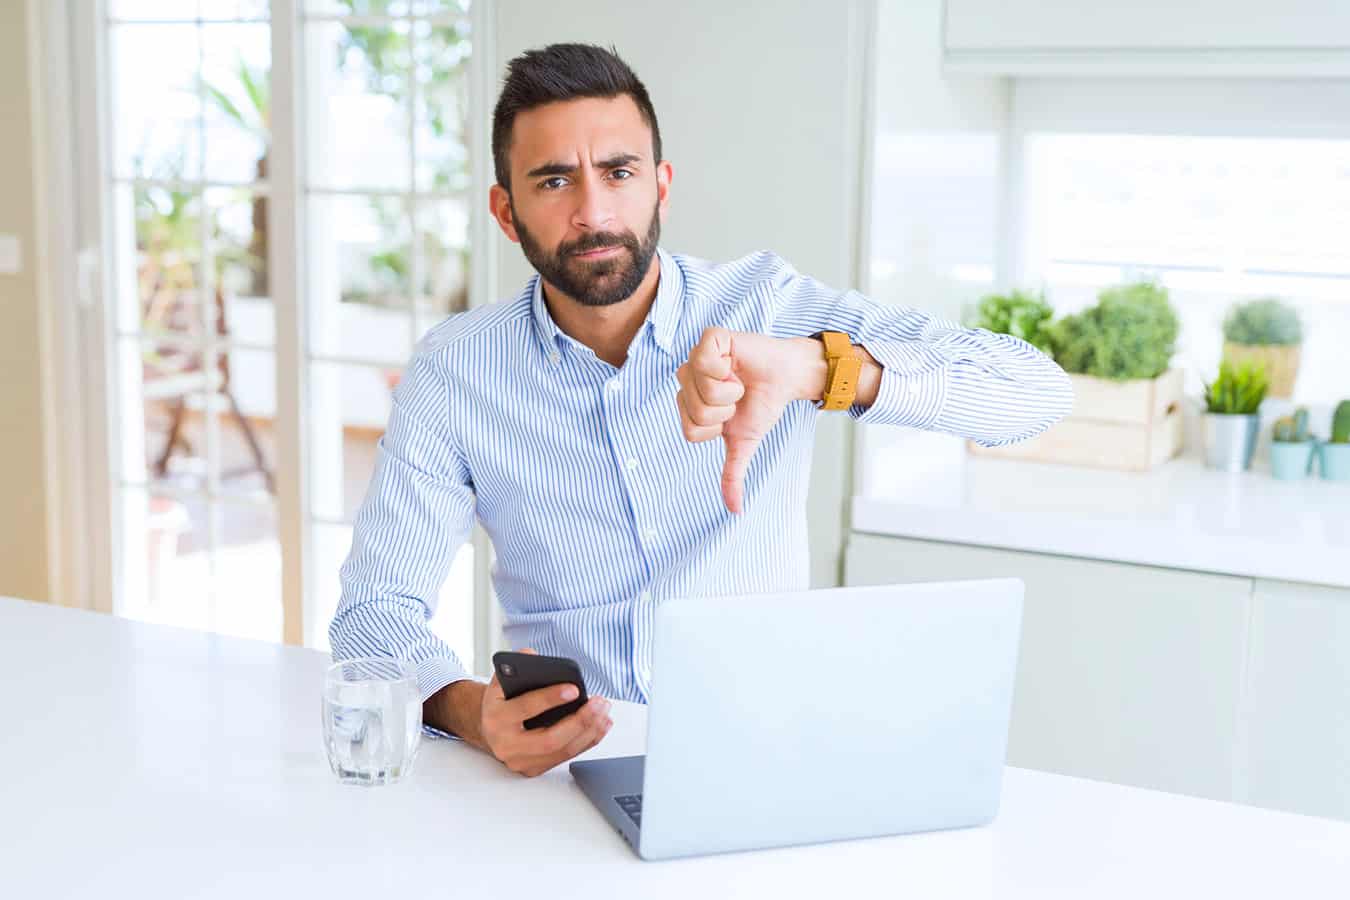 man-with-cell-phone-in-hand-looking-to-call-timeshare-company-while-on-computer-to-settle-it